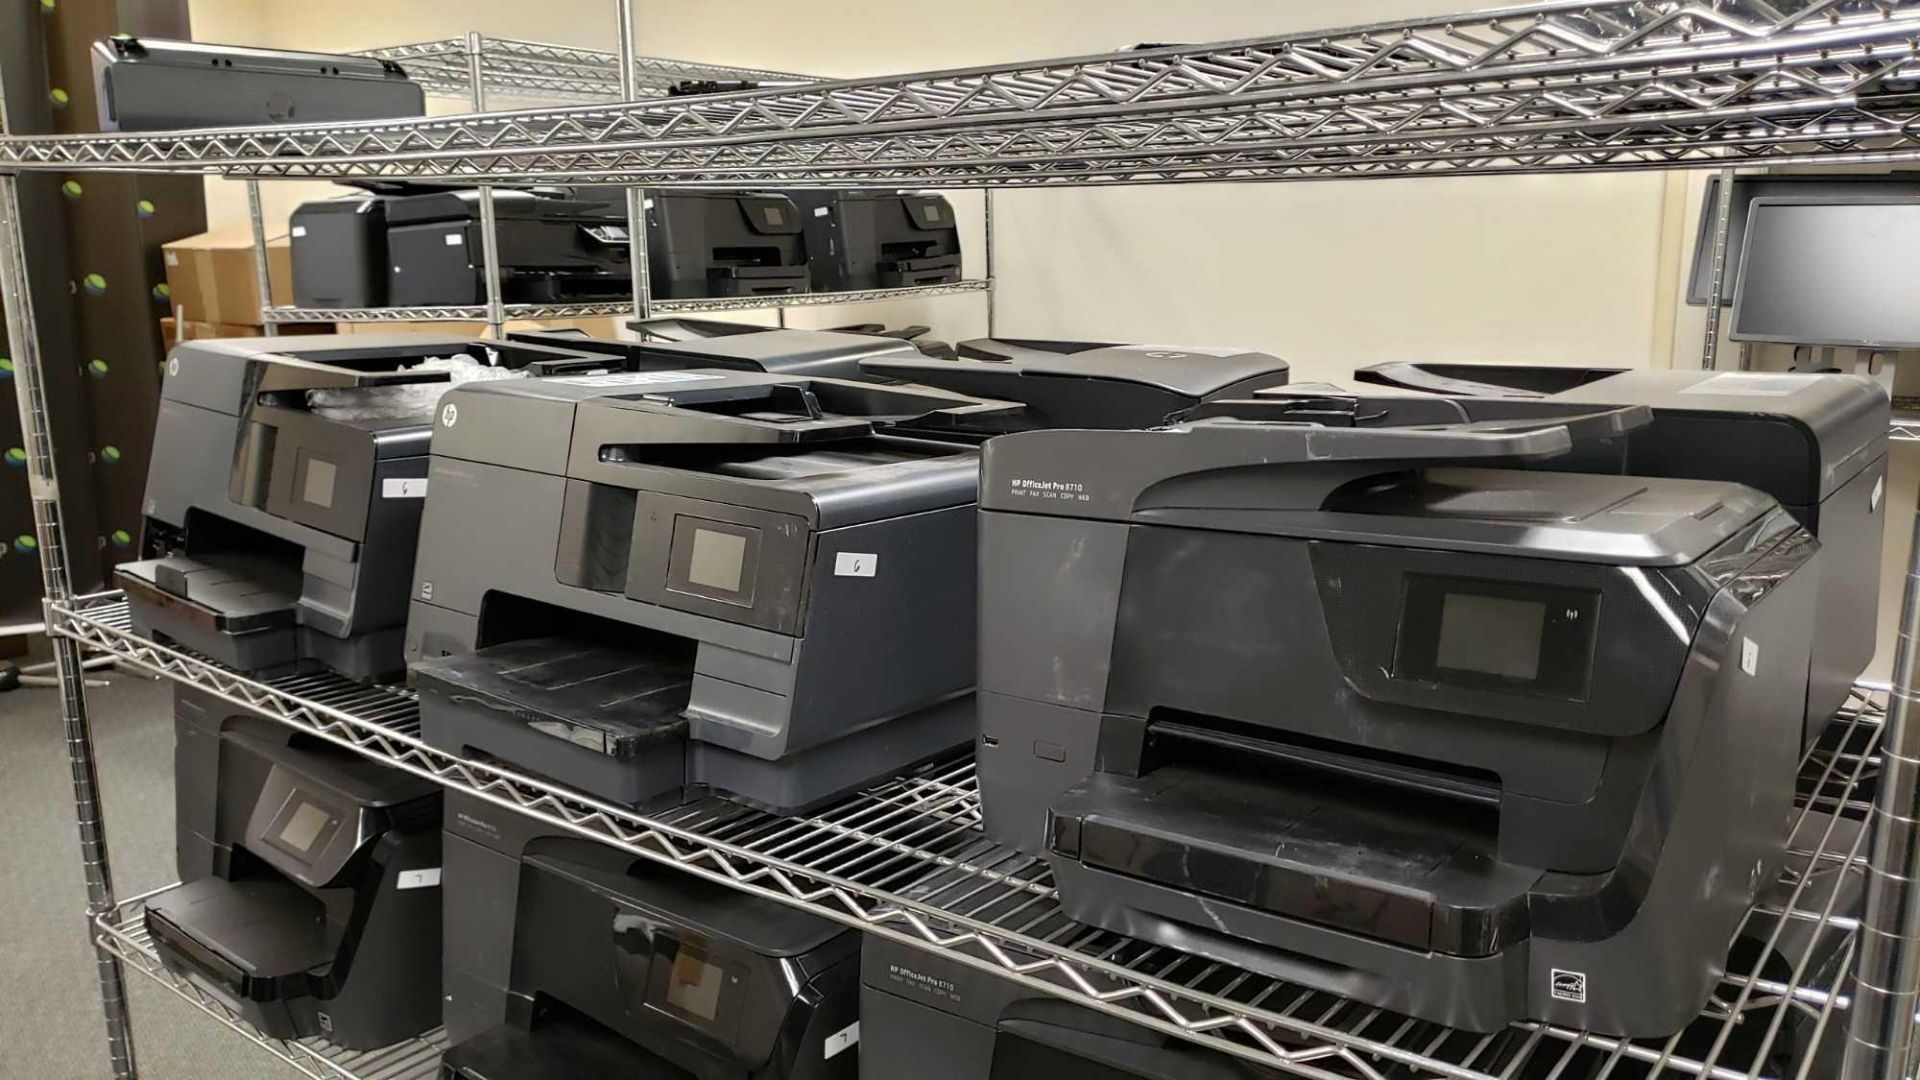 Lot of (3) HP Printers to include (2) HP Officejet Pro 8610 and (1) HP Officejet Pro 8710